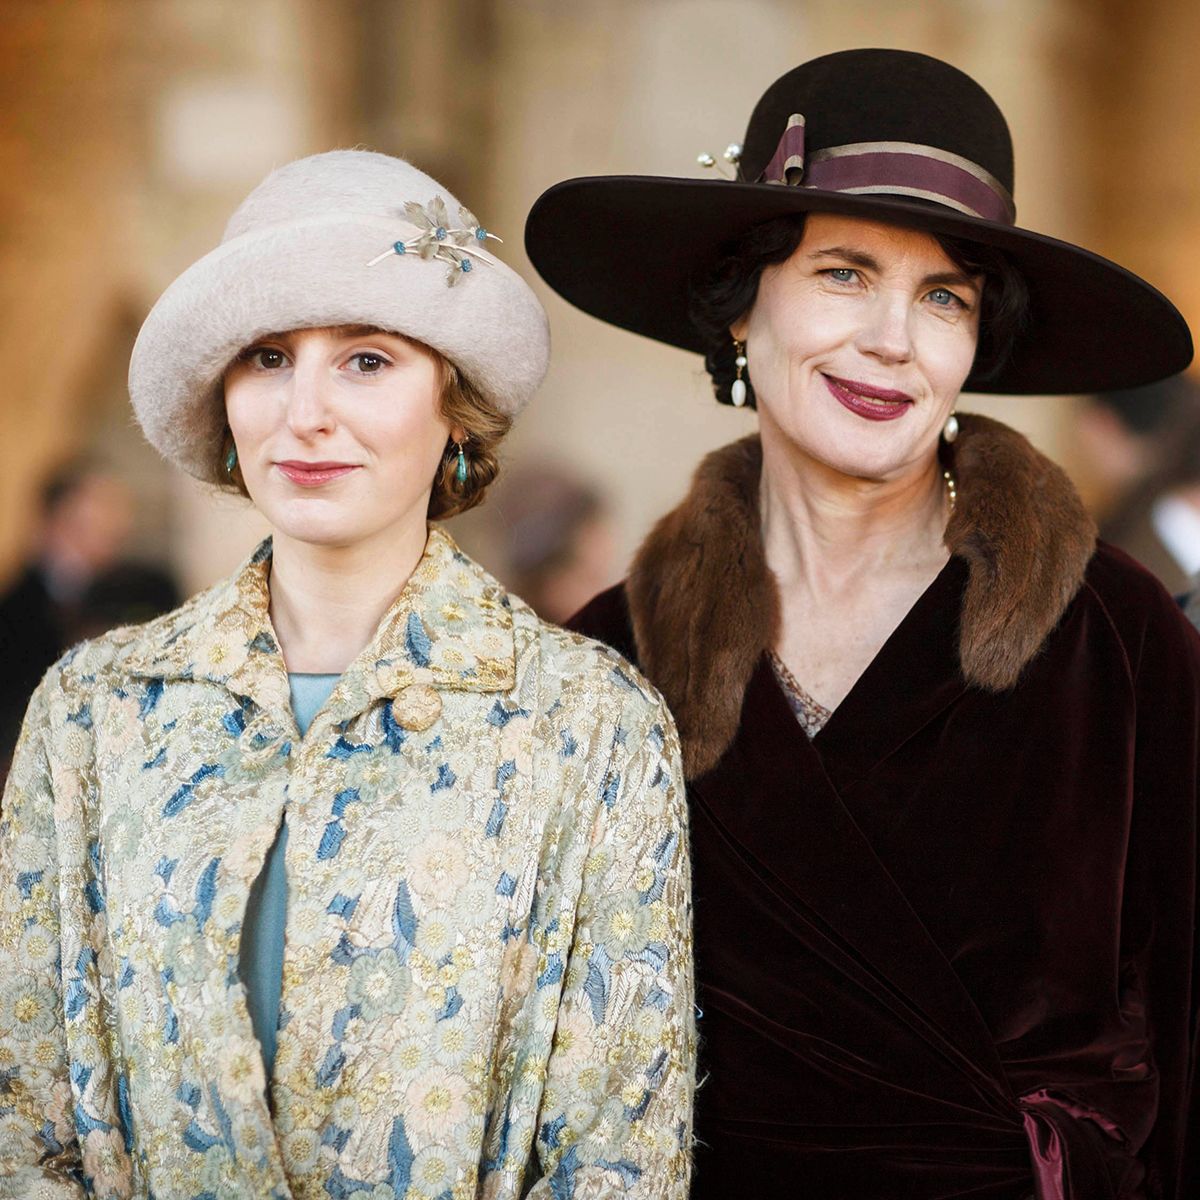 Make-up secrets from Downton Abbey